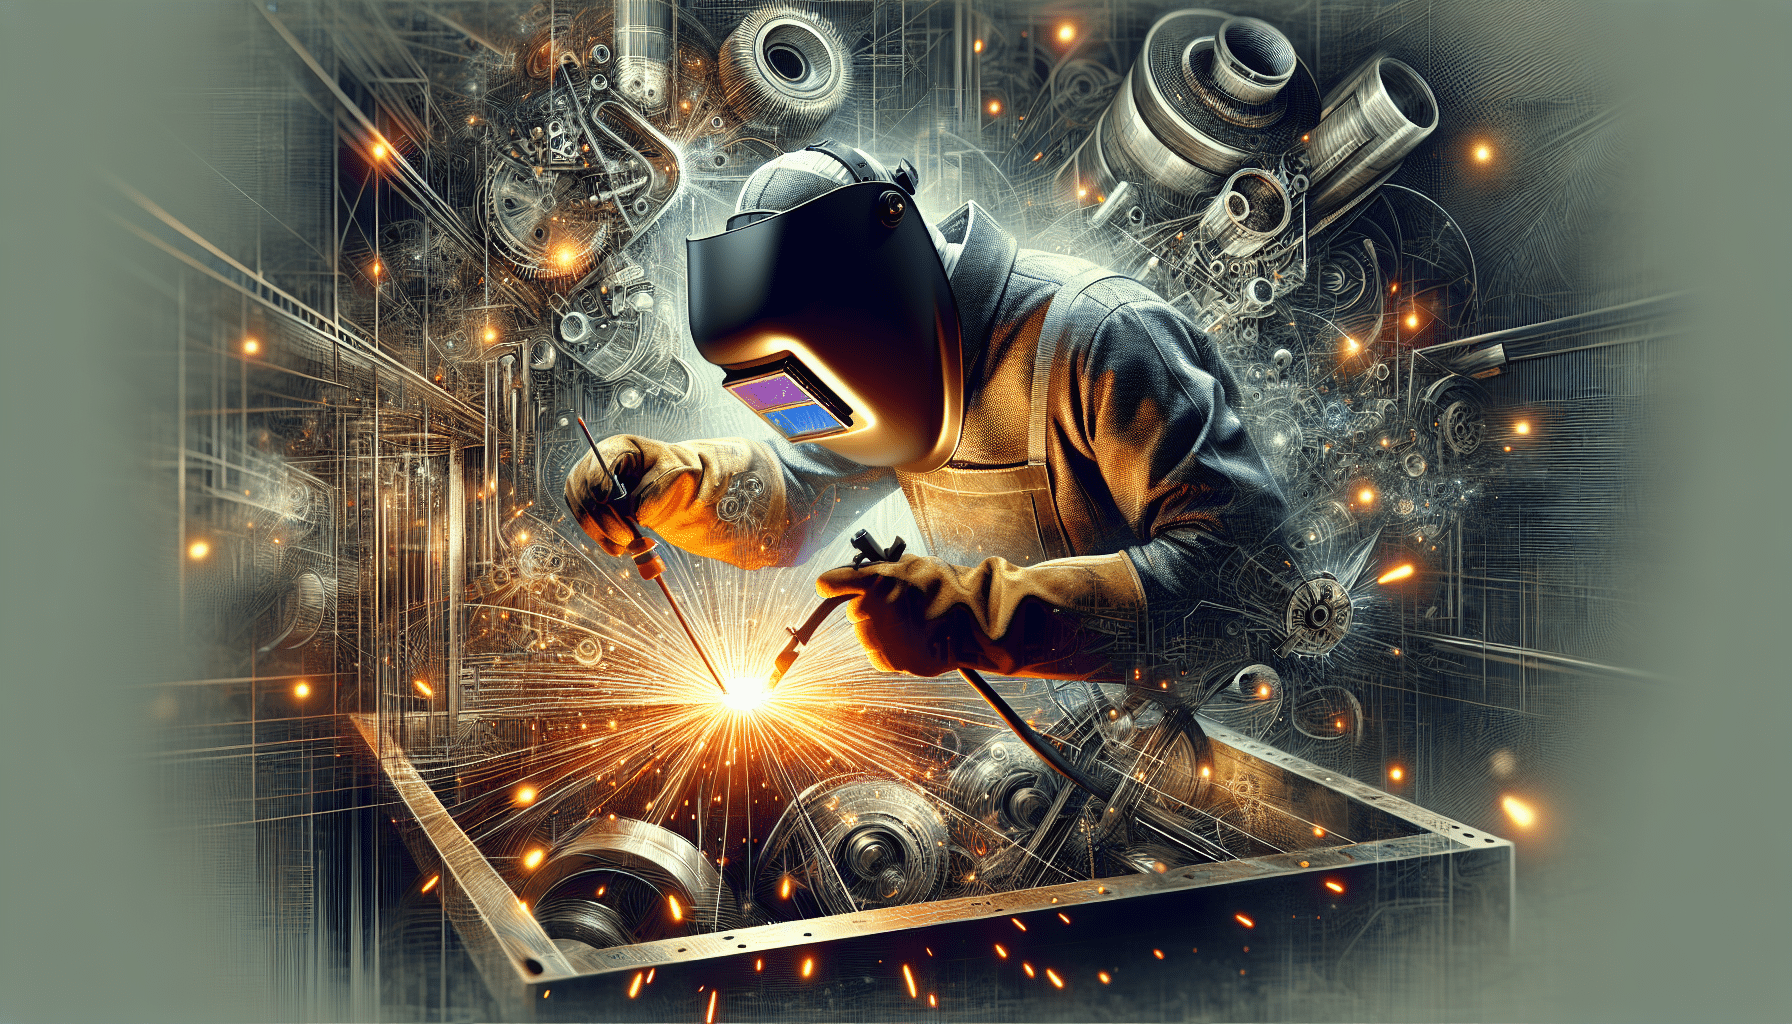 10 Tips for Making Money with Welding